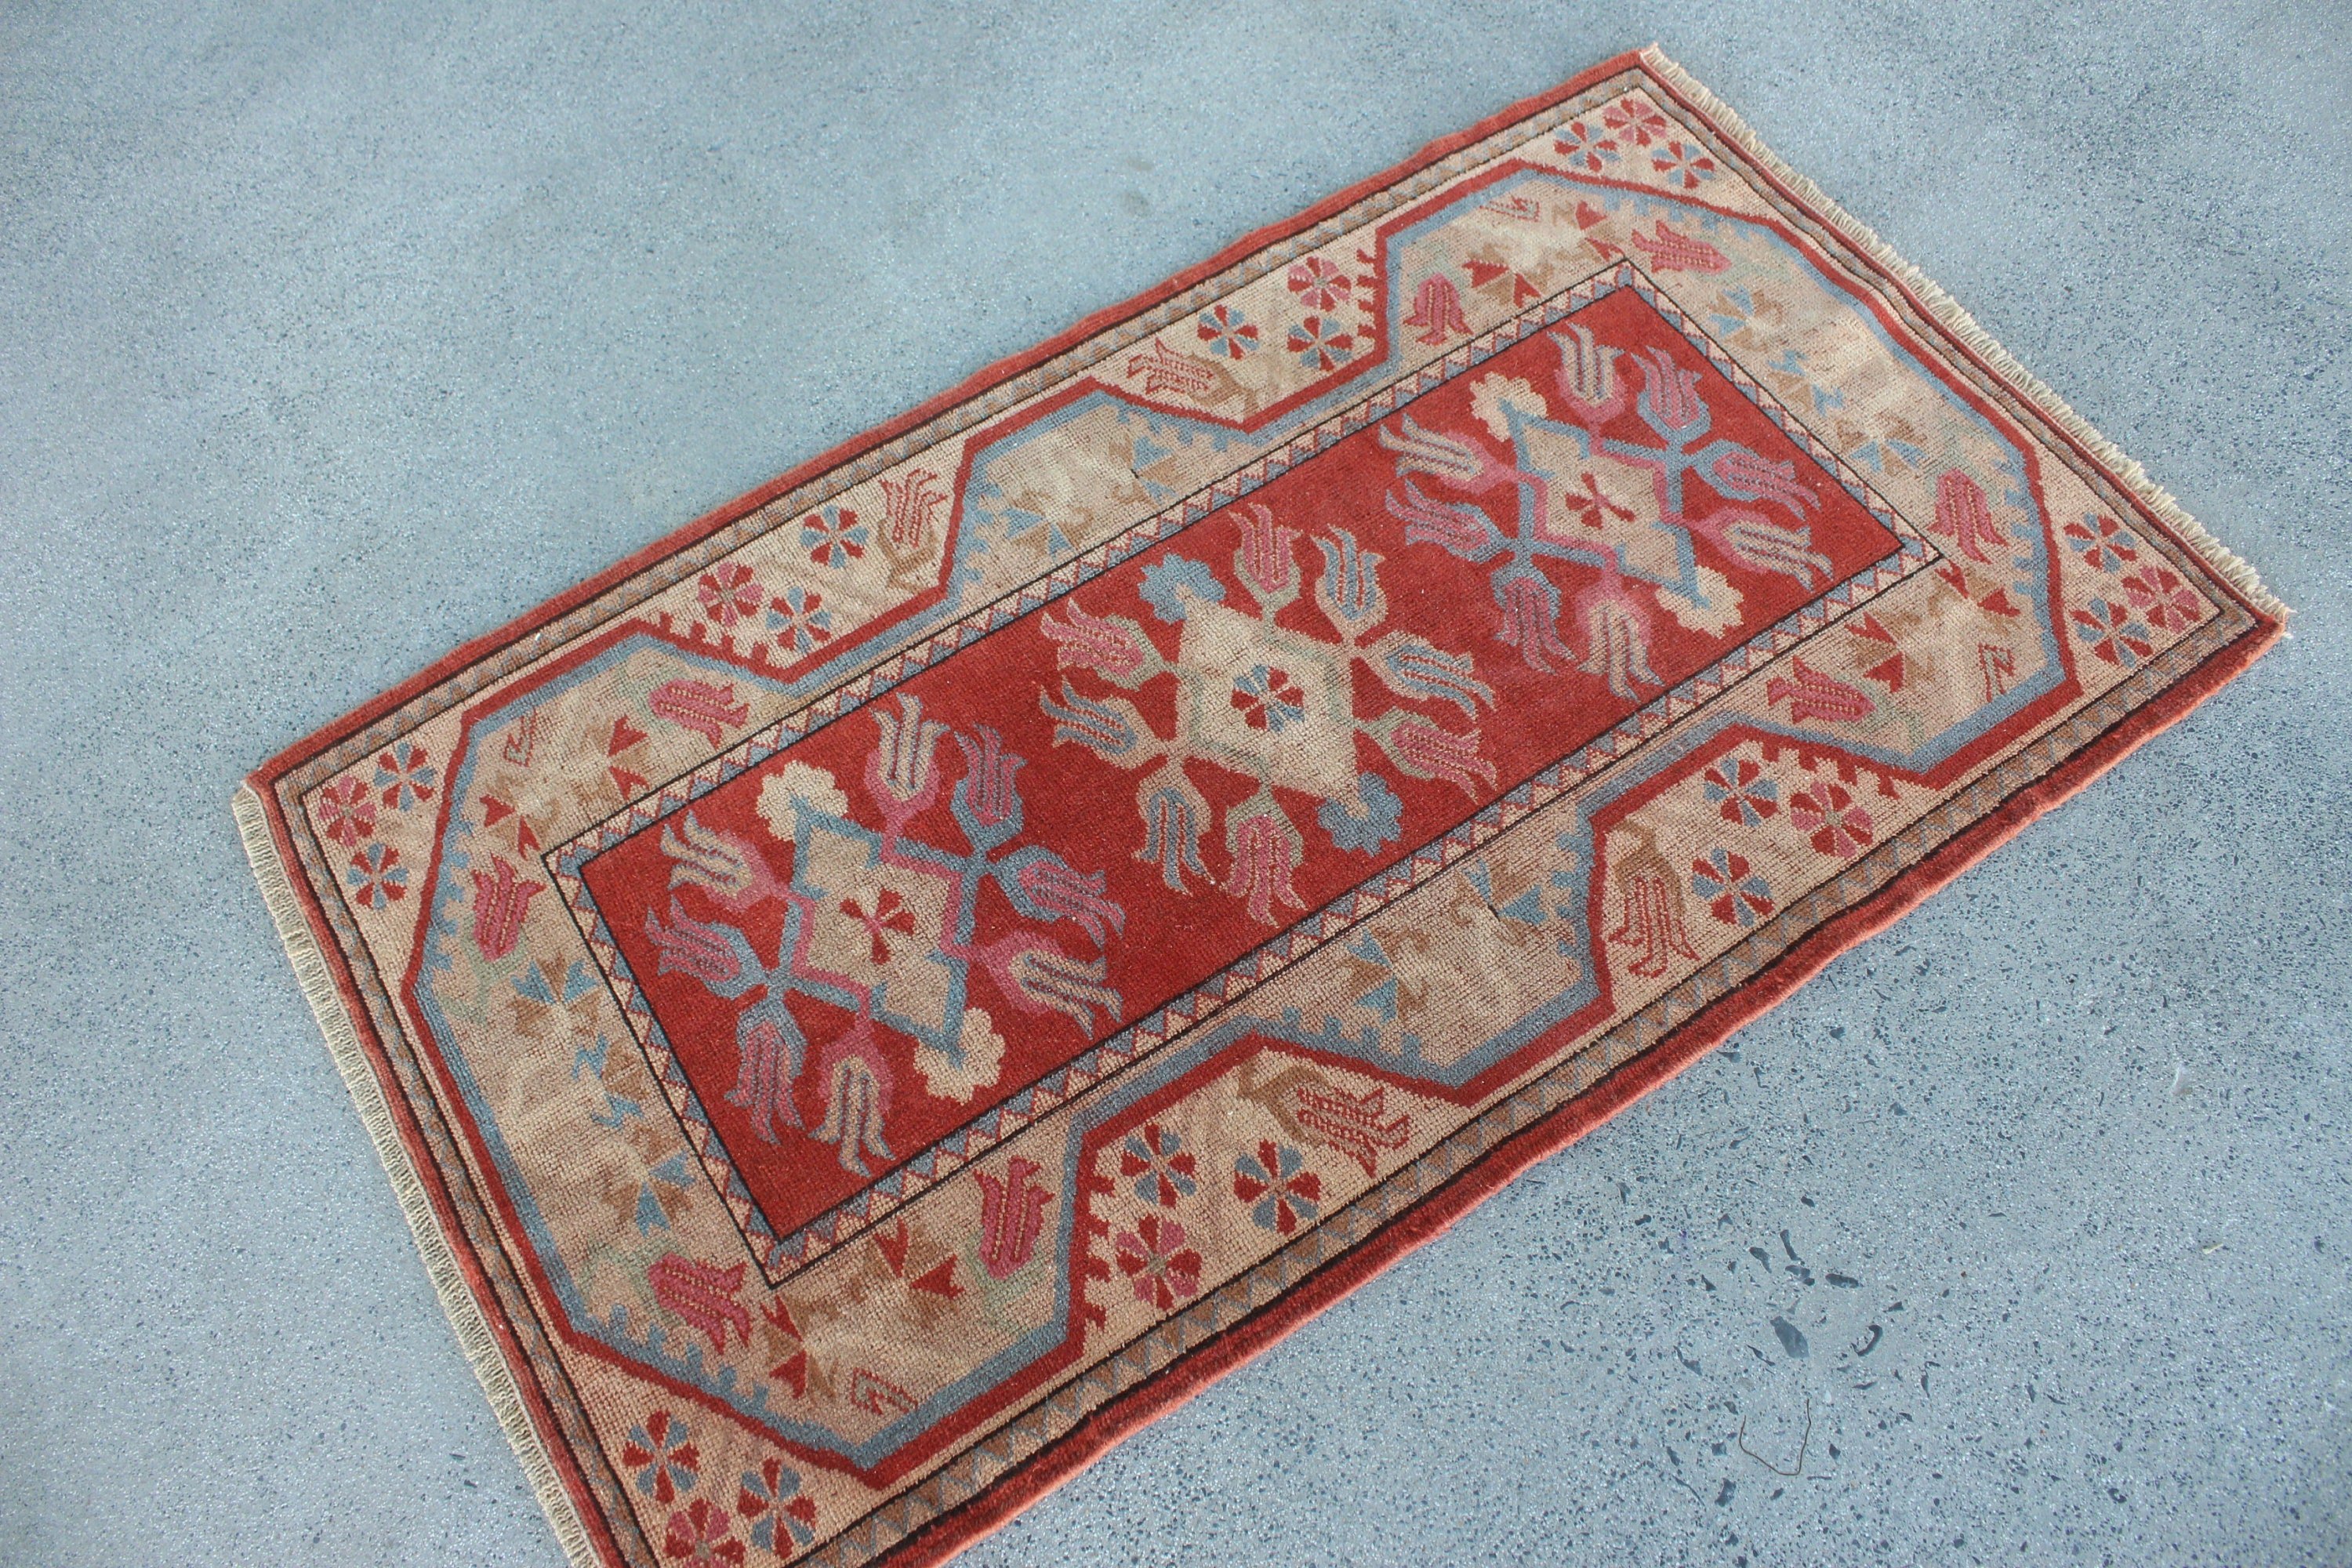 Bedroom Rugs, Kitchen Rug, Red Home Decor Rugs, Rugs for Bath, Antique Rug, Vintage Rugs, Wool Rugs, 2.5x4.4 ft Small Rug, Turkish Rugs